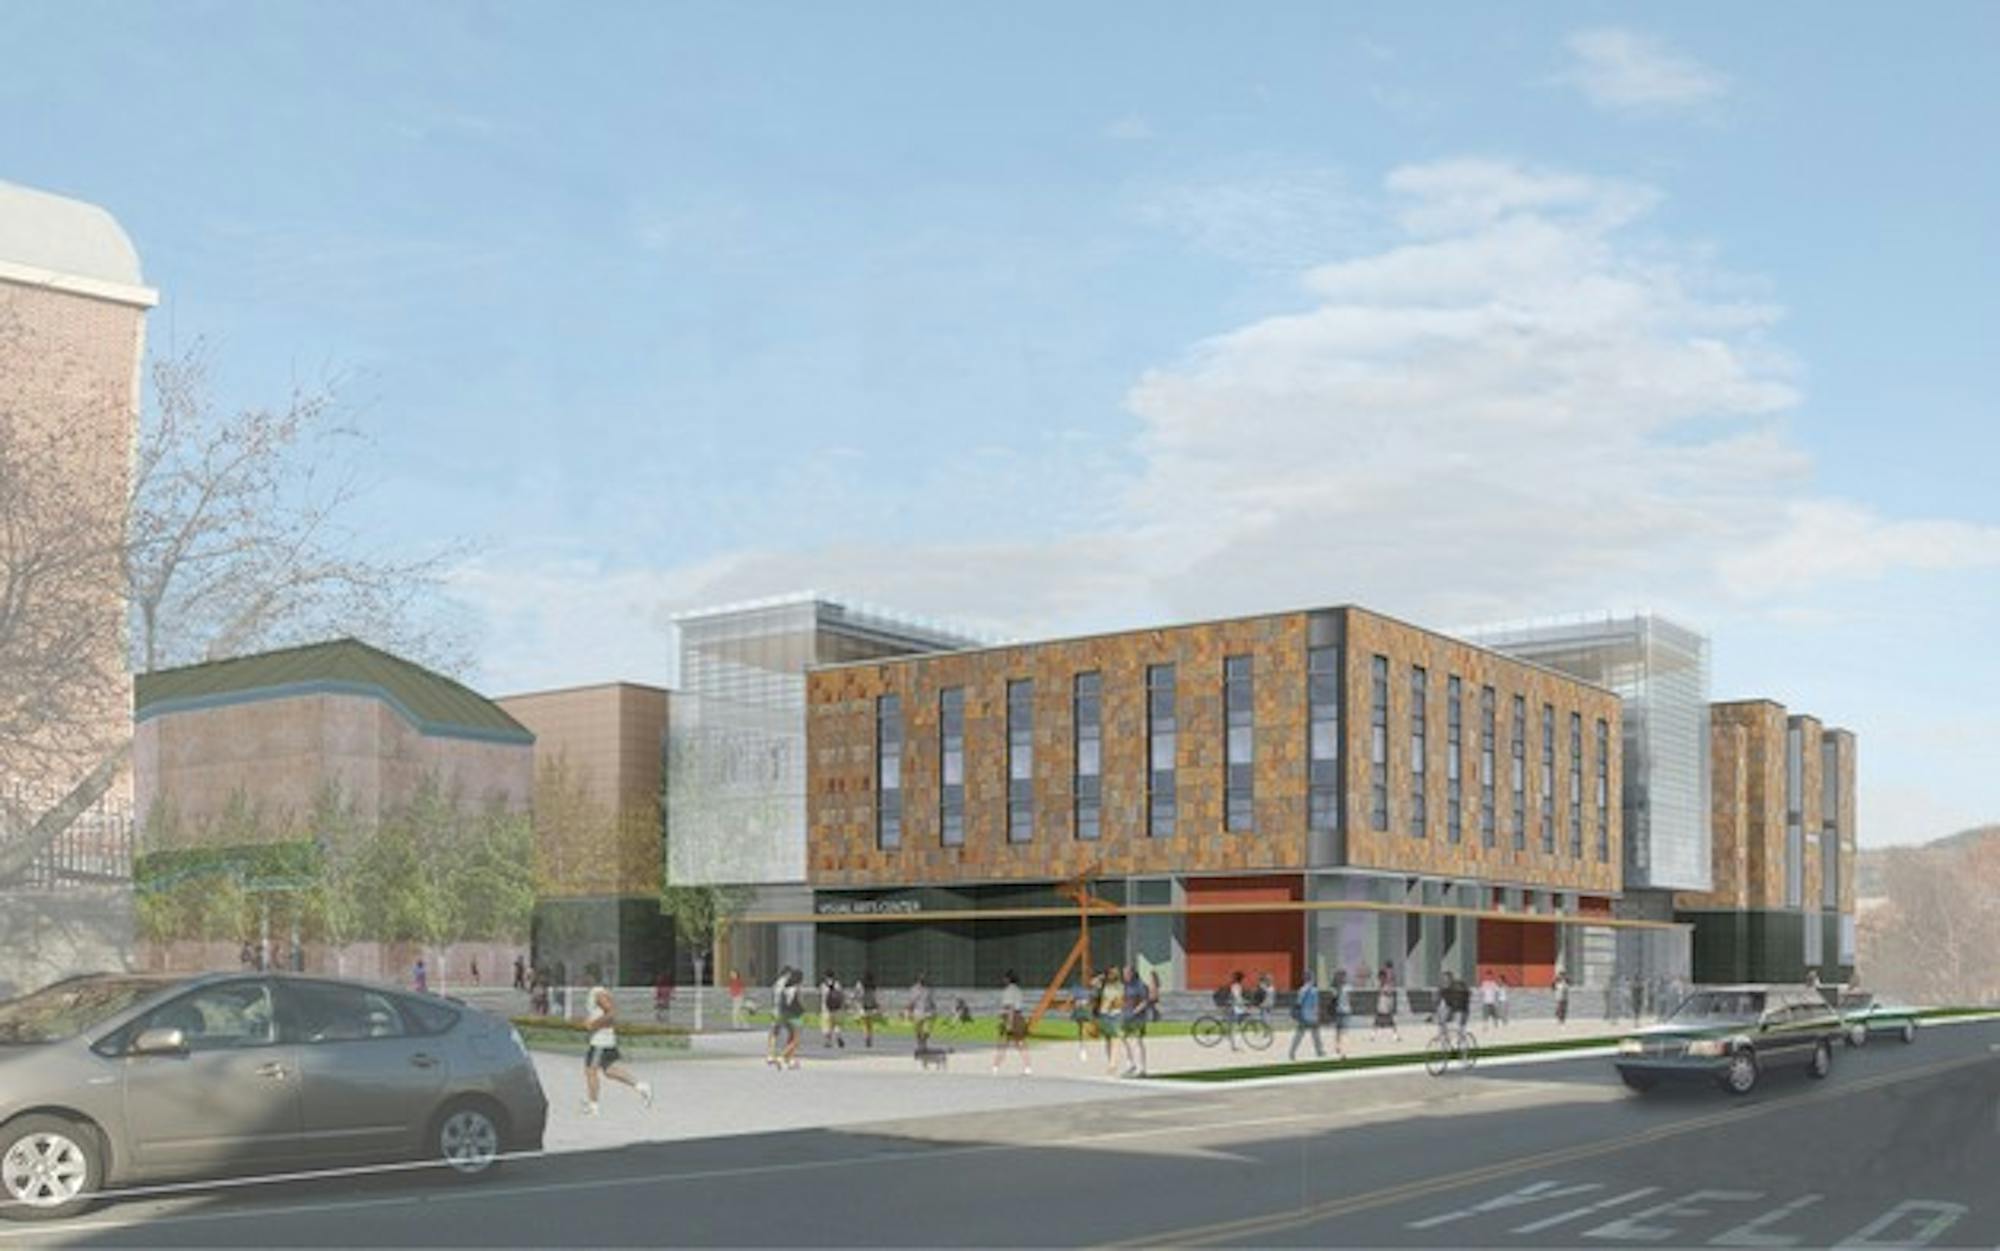 Plans for a new $52 million visual arts center were released this week.